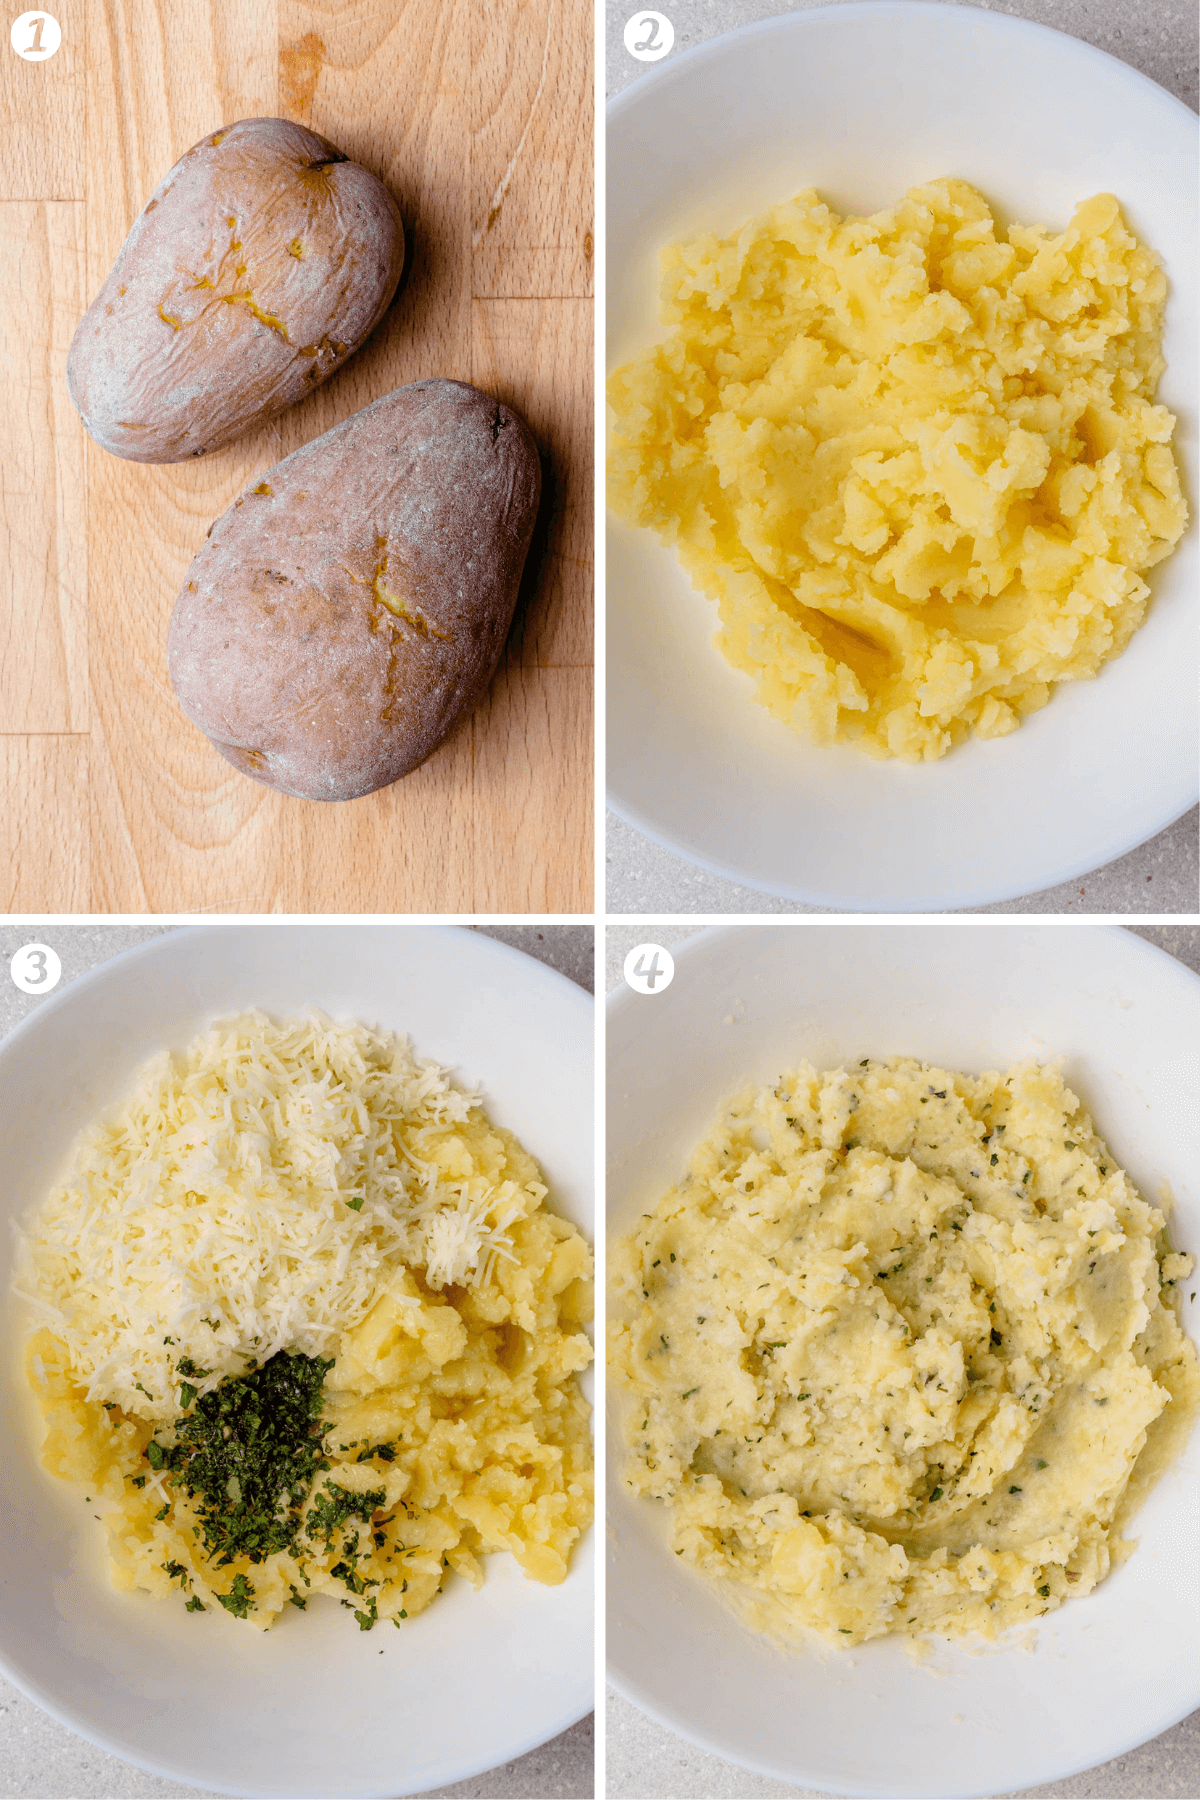 Steps on how to make the potato filling for culurgiones